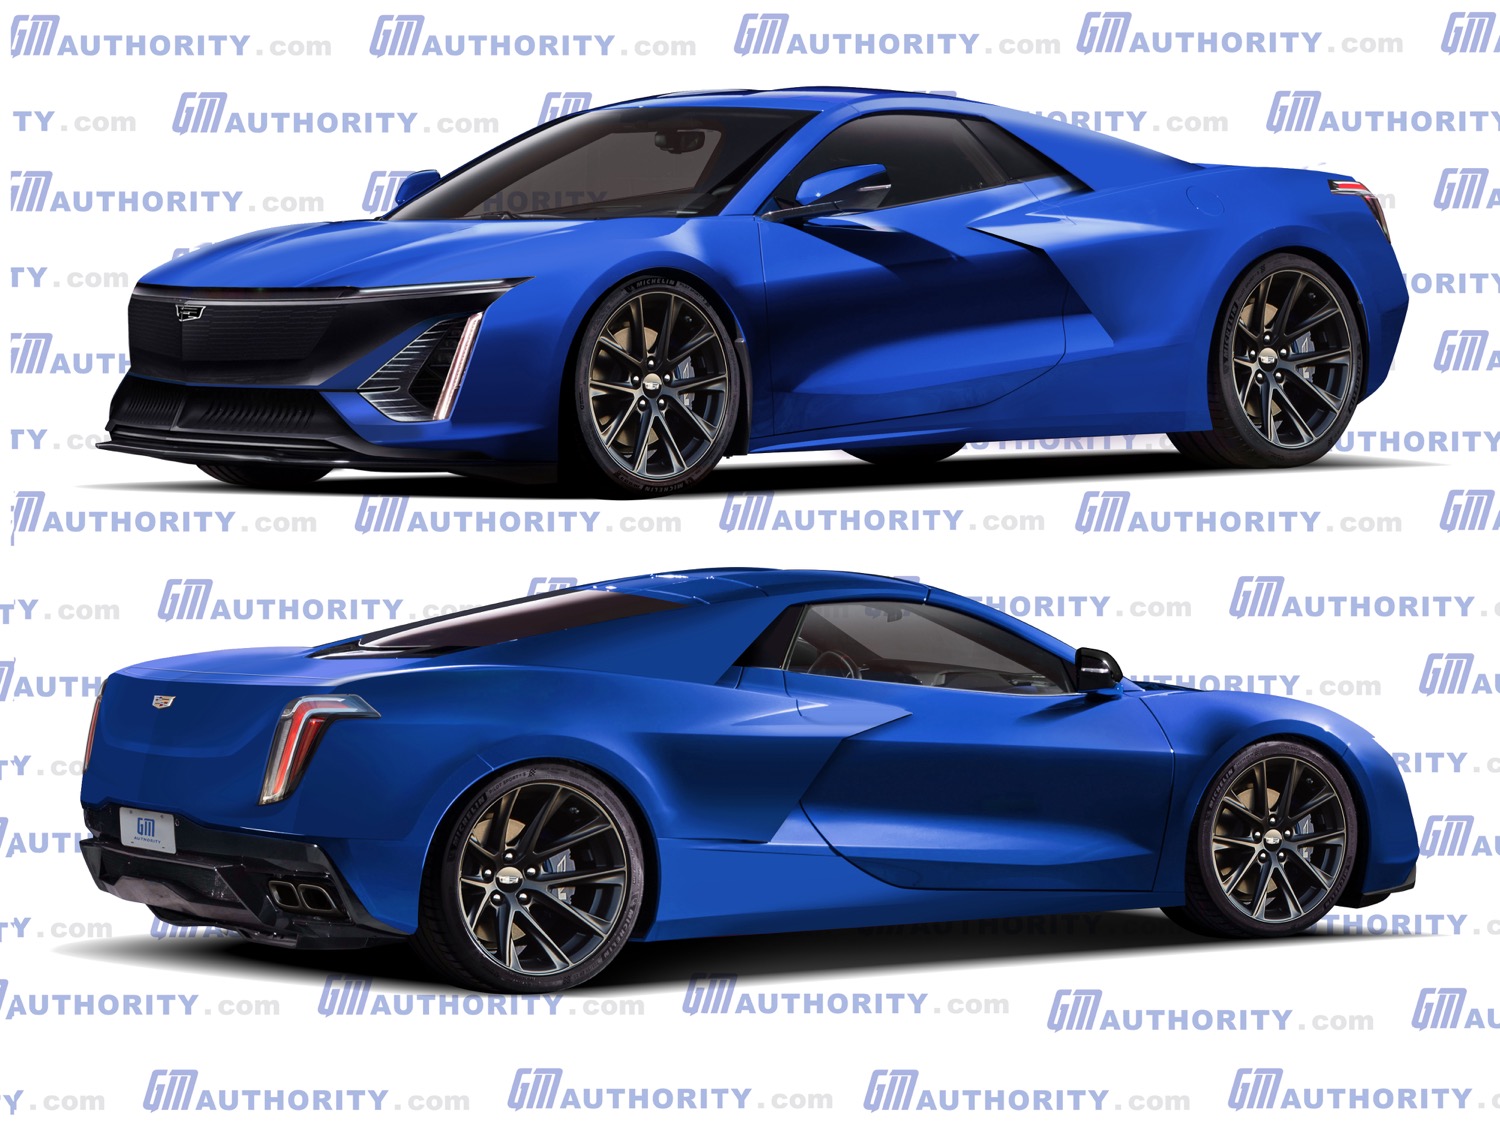 Mid-engine Cadillac Sports Car Rendered Gm Authority